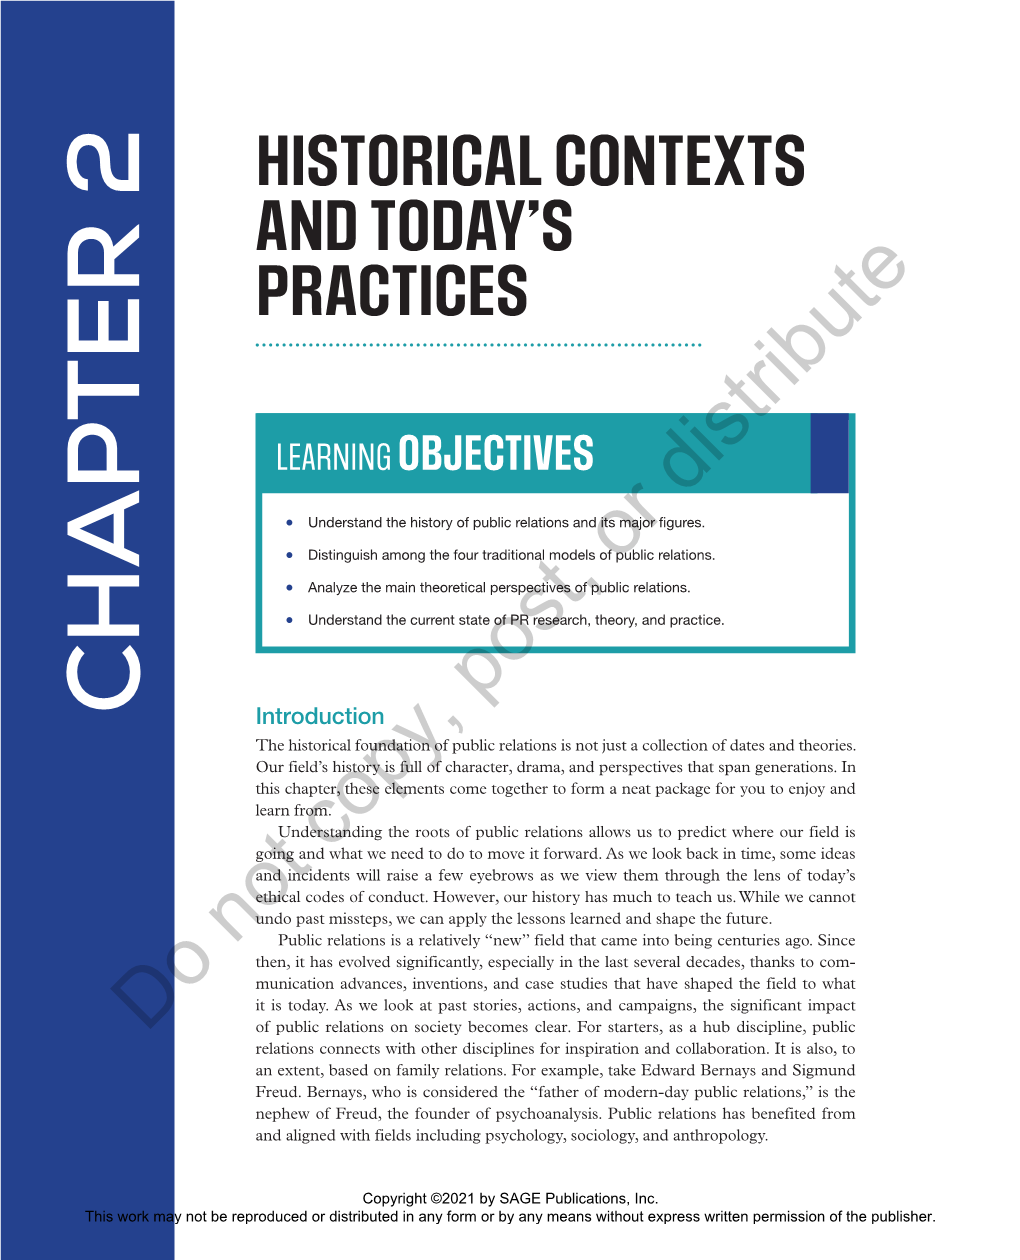 Chapter 2 Historical Contexts and Today's Practices